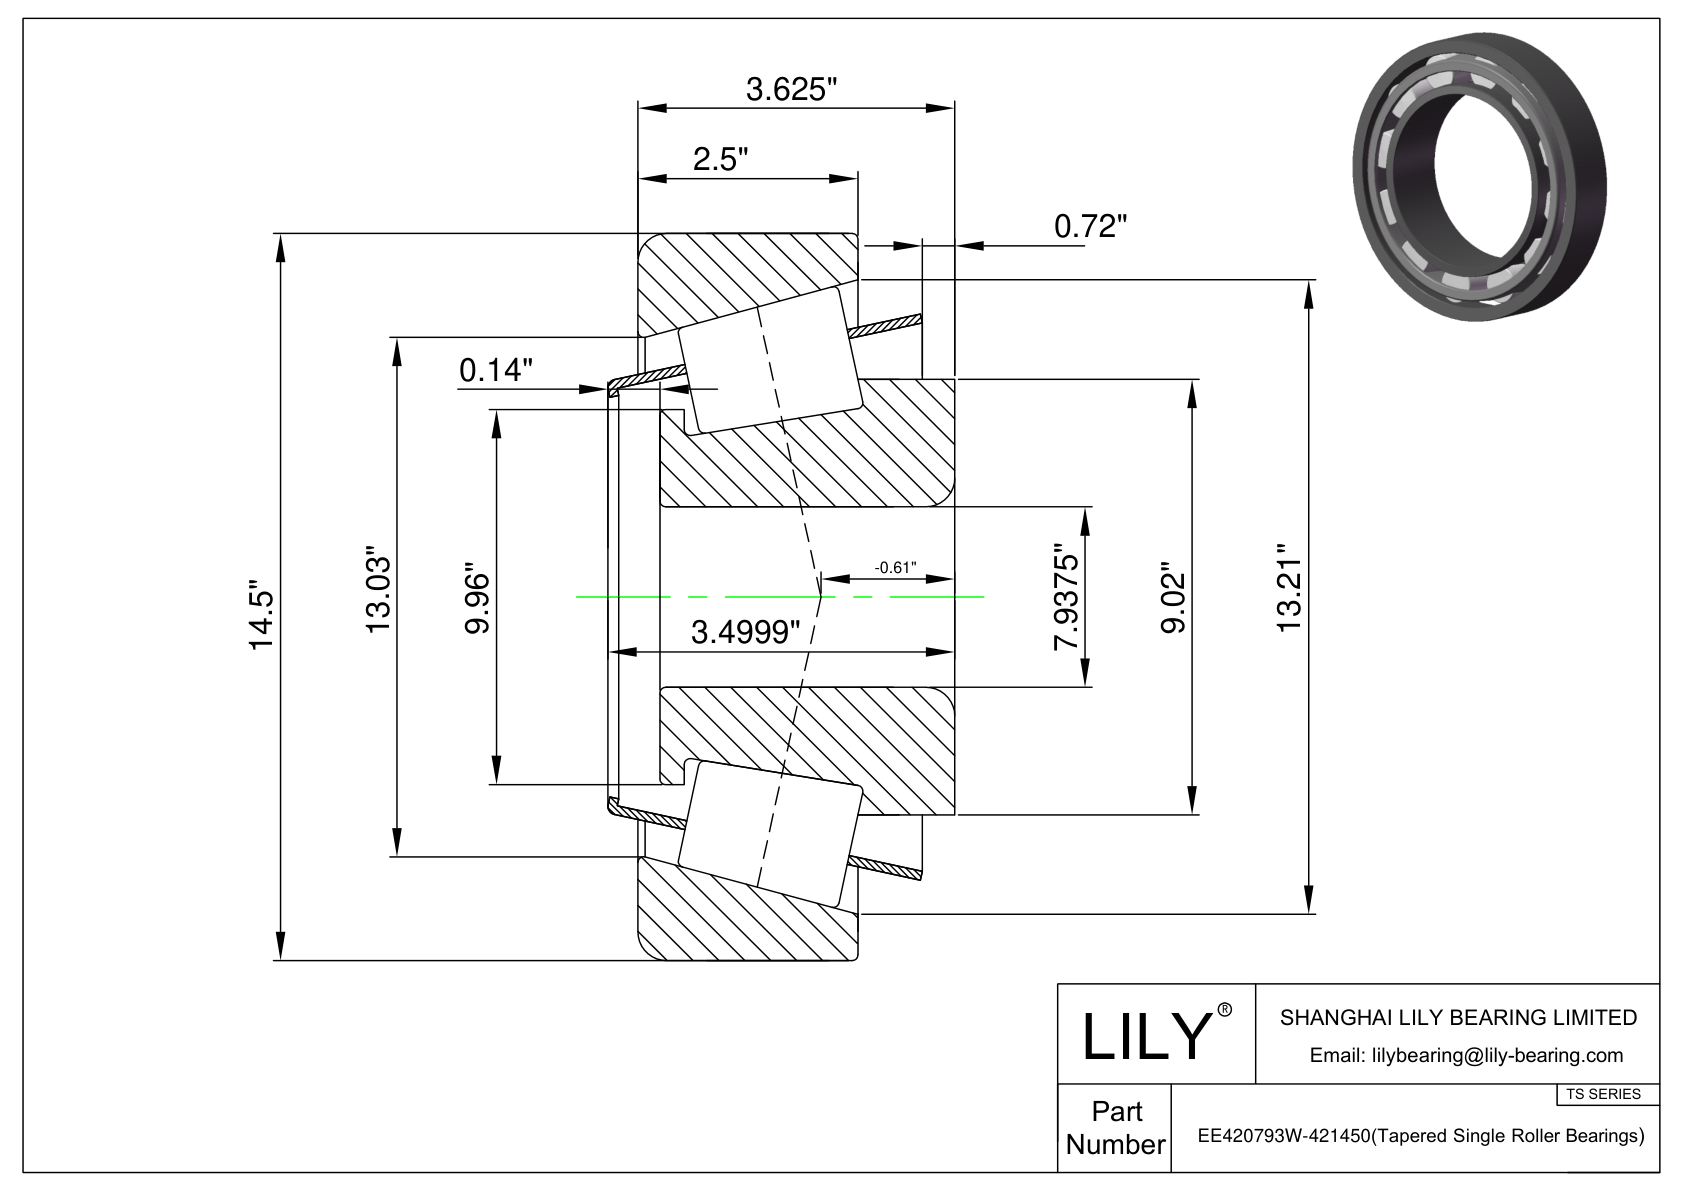 EE420793W-421450 TS (Tapered Single Roller Bearings) (Imperial) cad drawing